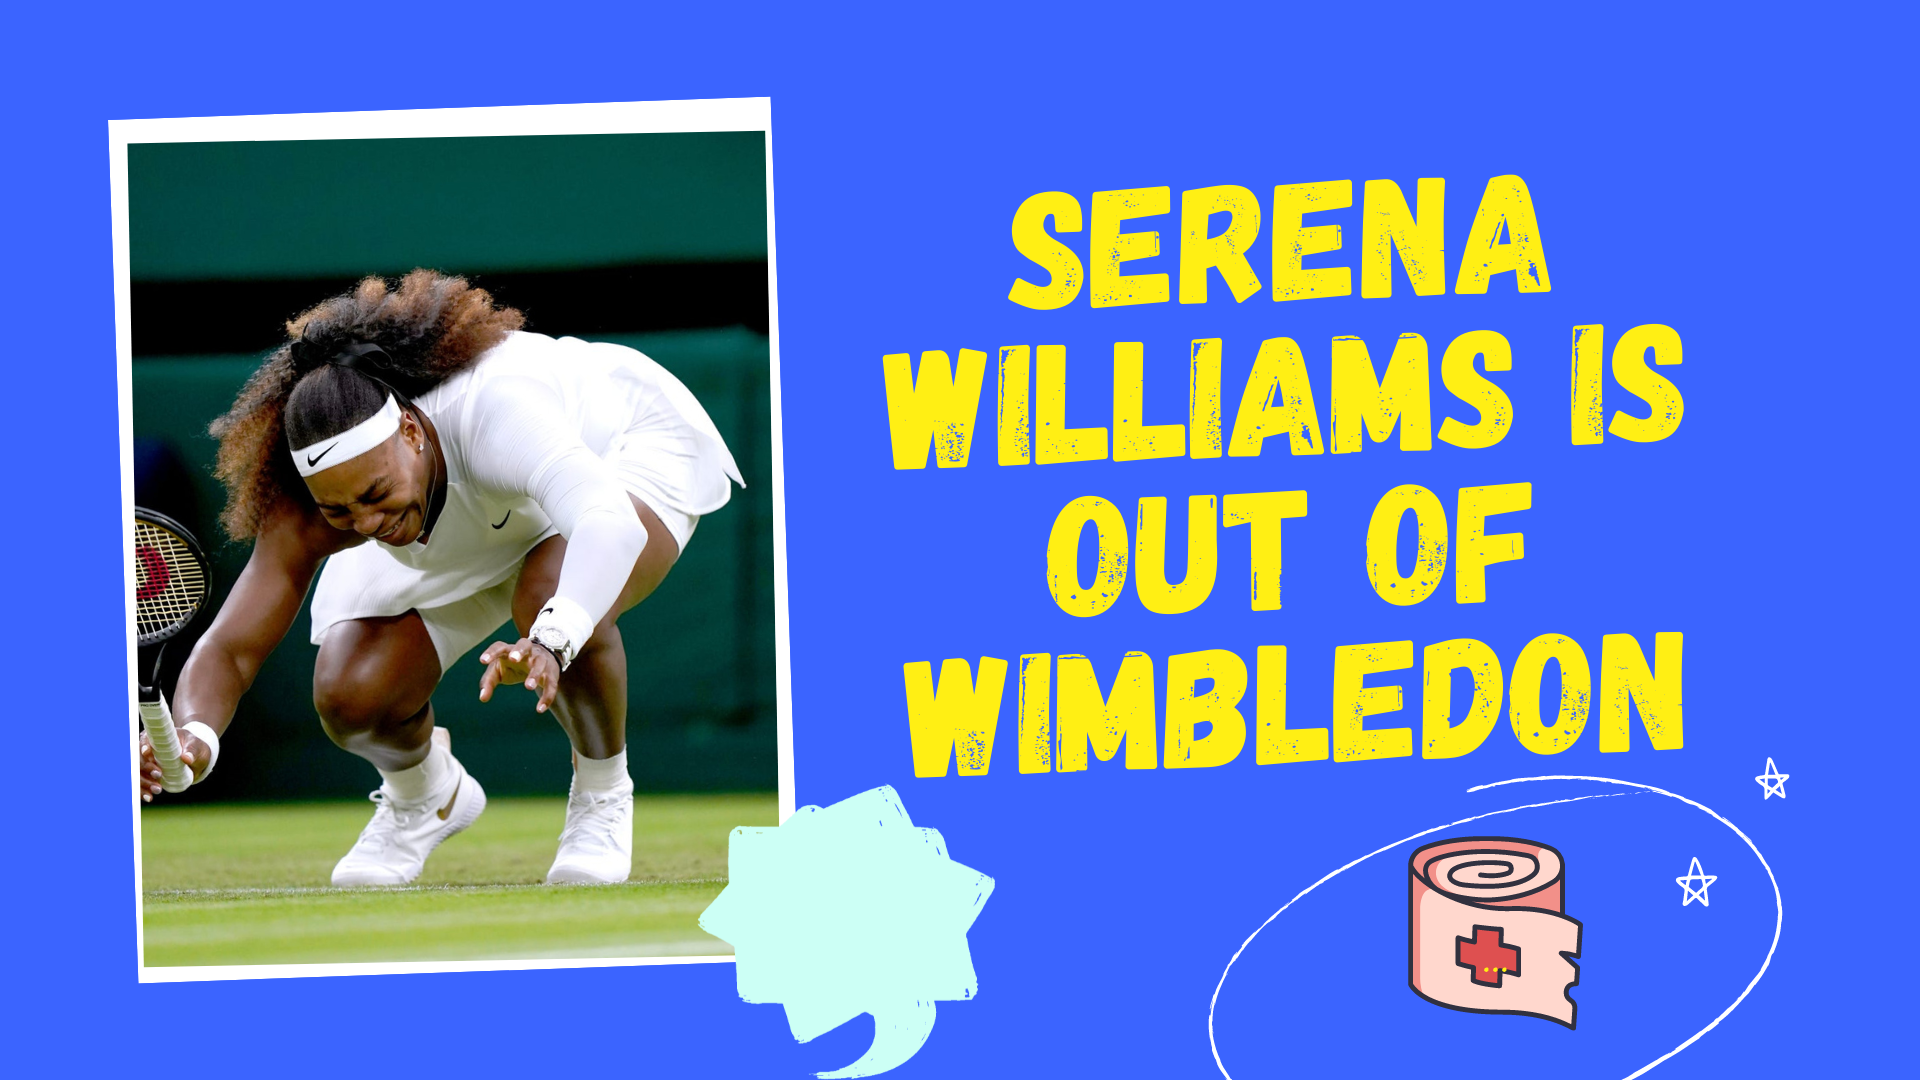 Serena Williams is out of Wimbledon - Due to Injury